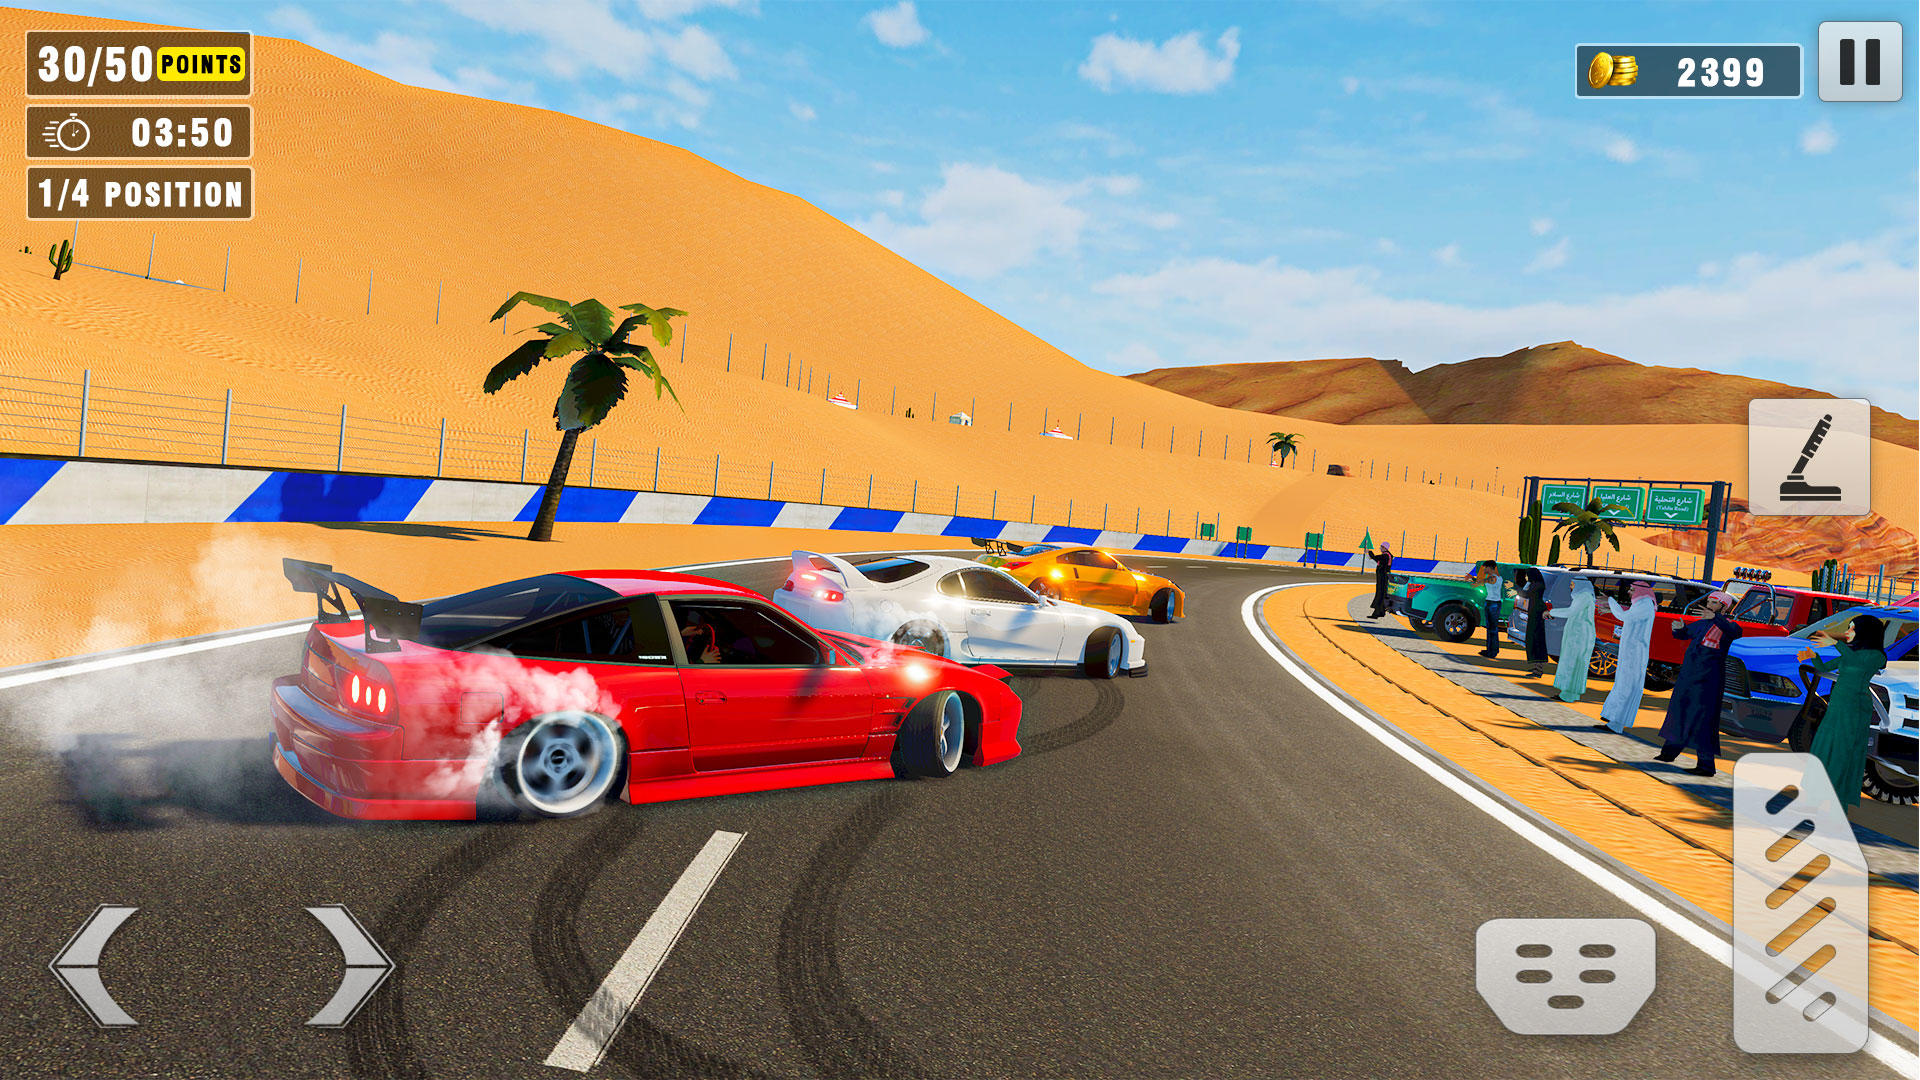 Hajwala Drift APK Download for Android Free - Games